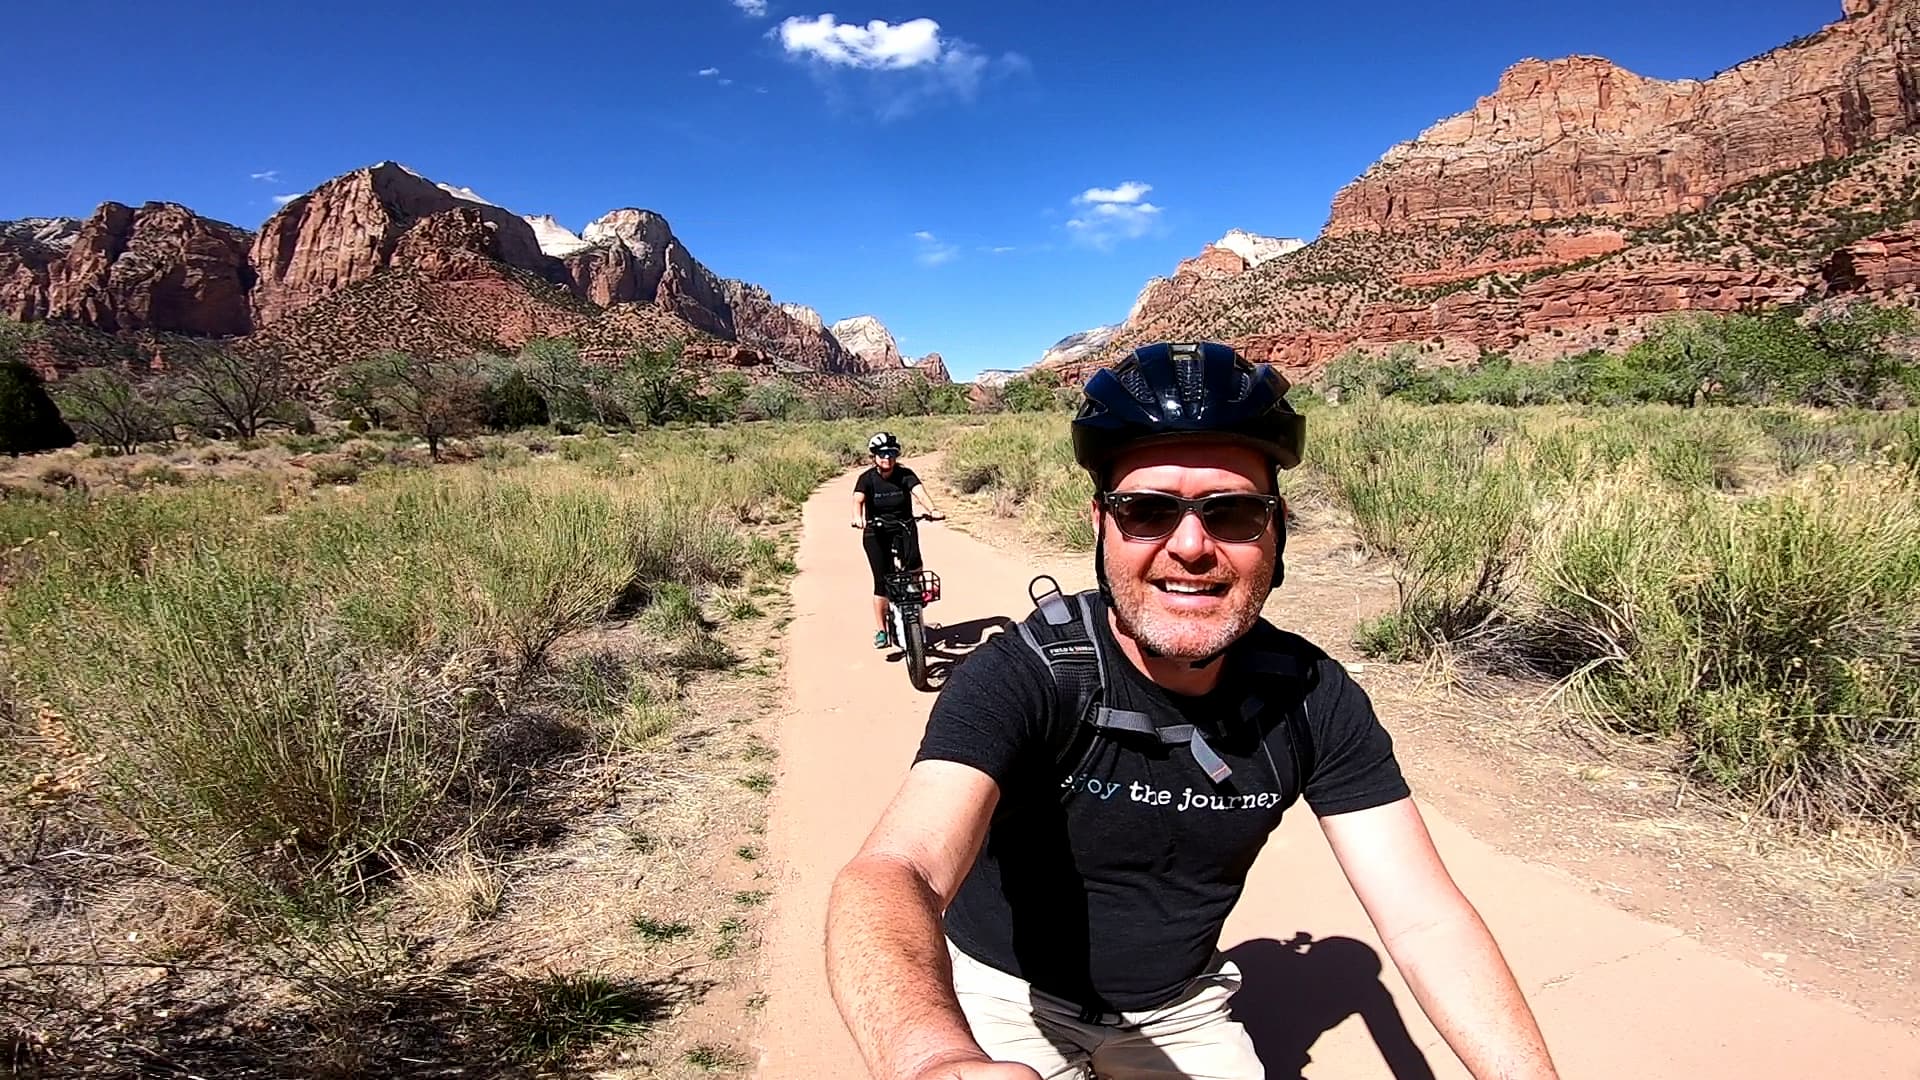 Tom and Cheri of Enjoythejounrey.life using their electric bikes in the desert.